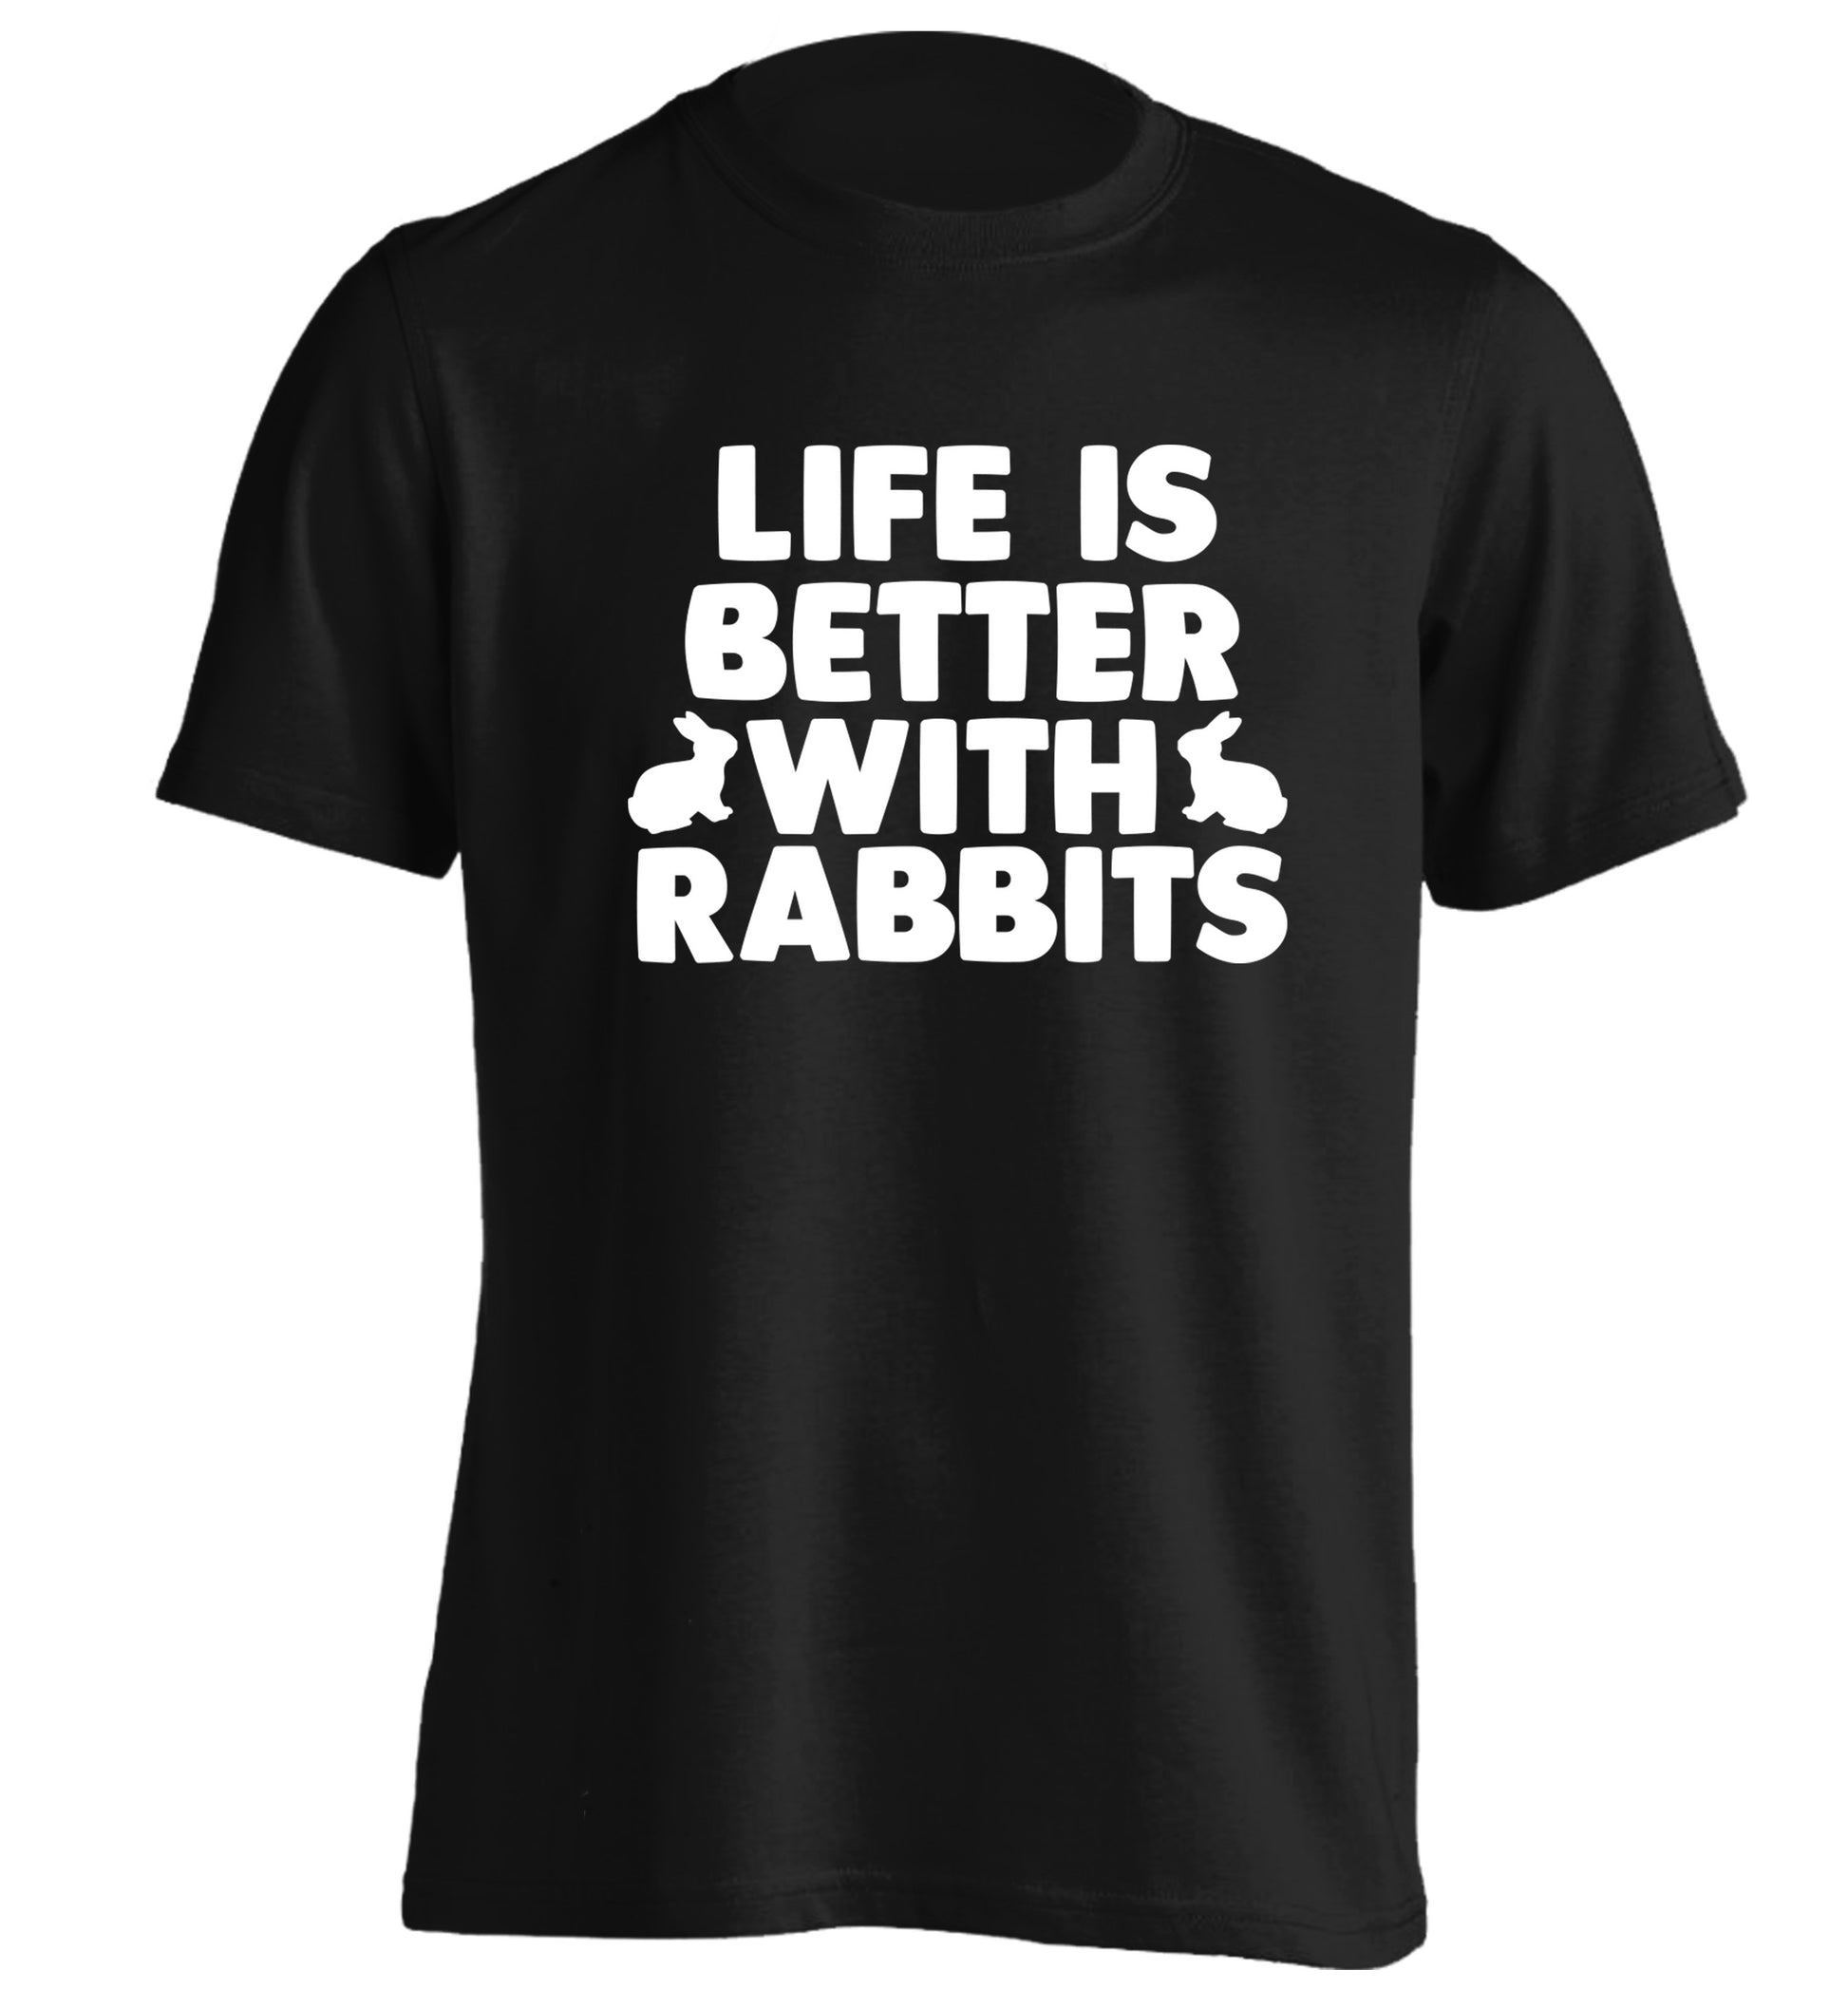 Life is better with rabbits adults unisex black Tshirt 2XL